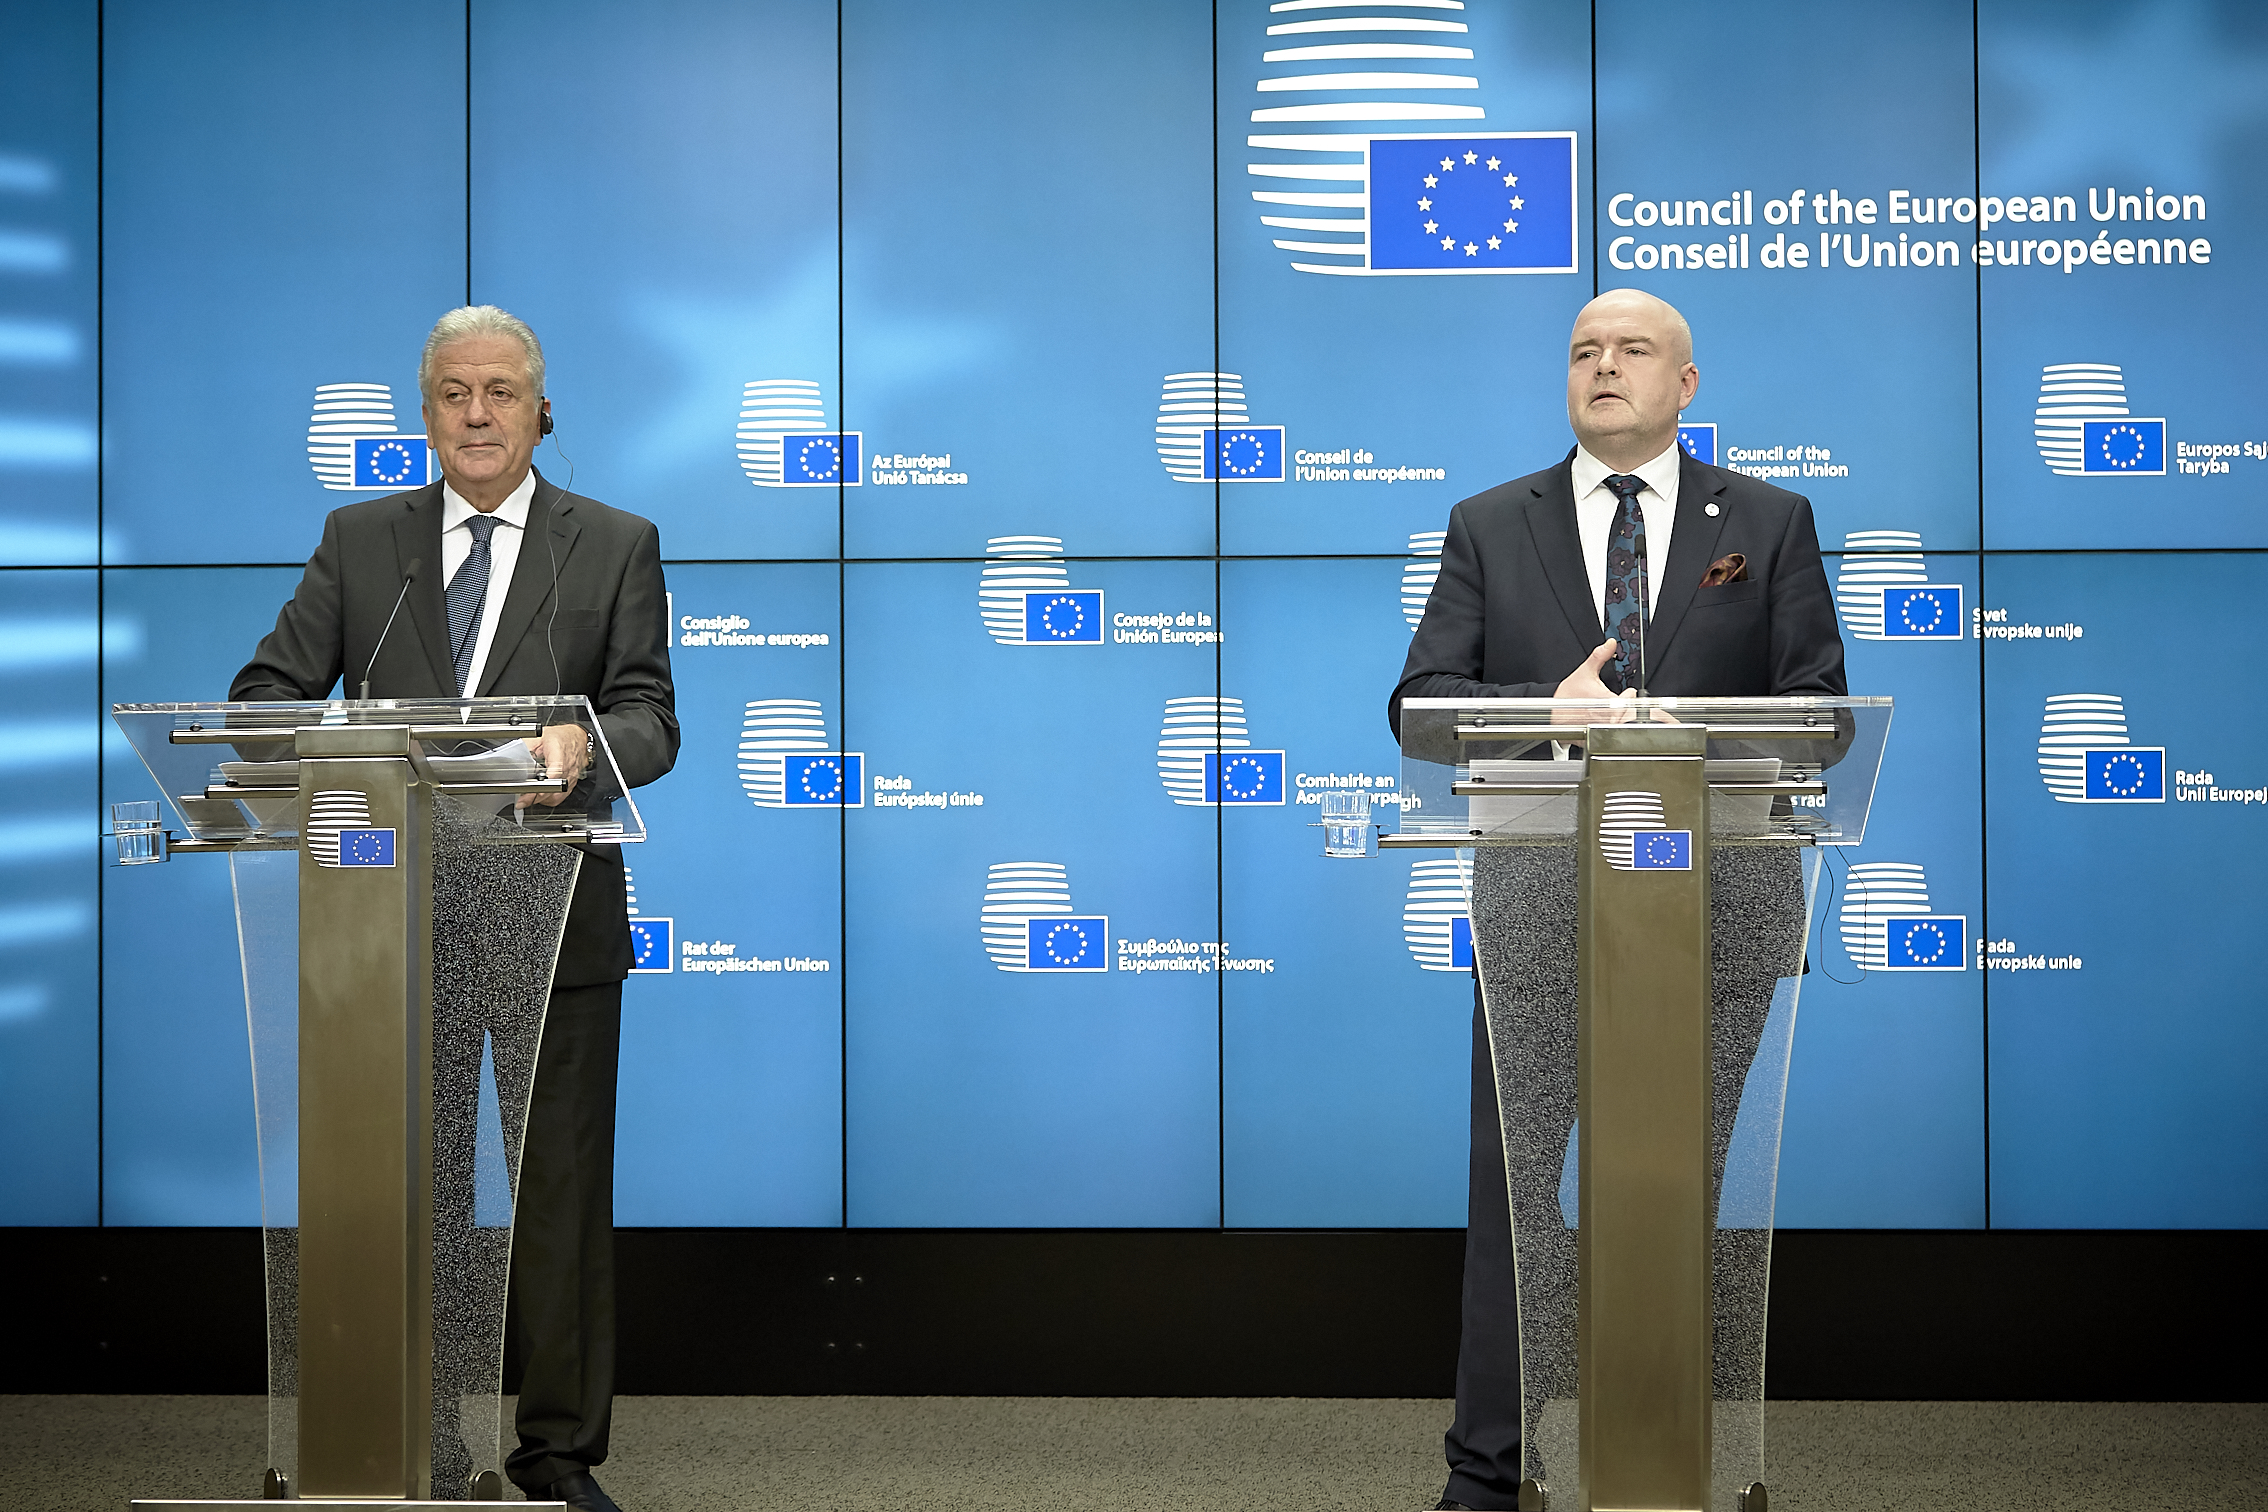 Minister of interior of Estonia, Andres Anvelt with EU Commissioner of Migration and interior affairs Dimitris Avramopoulos during the press conference